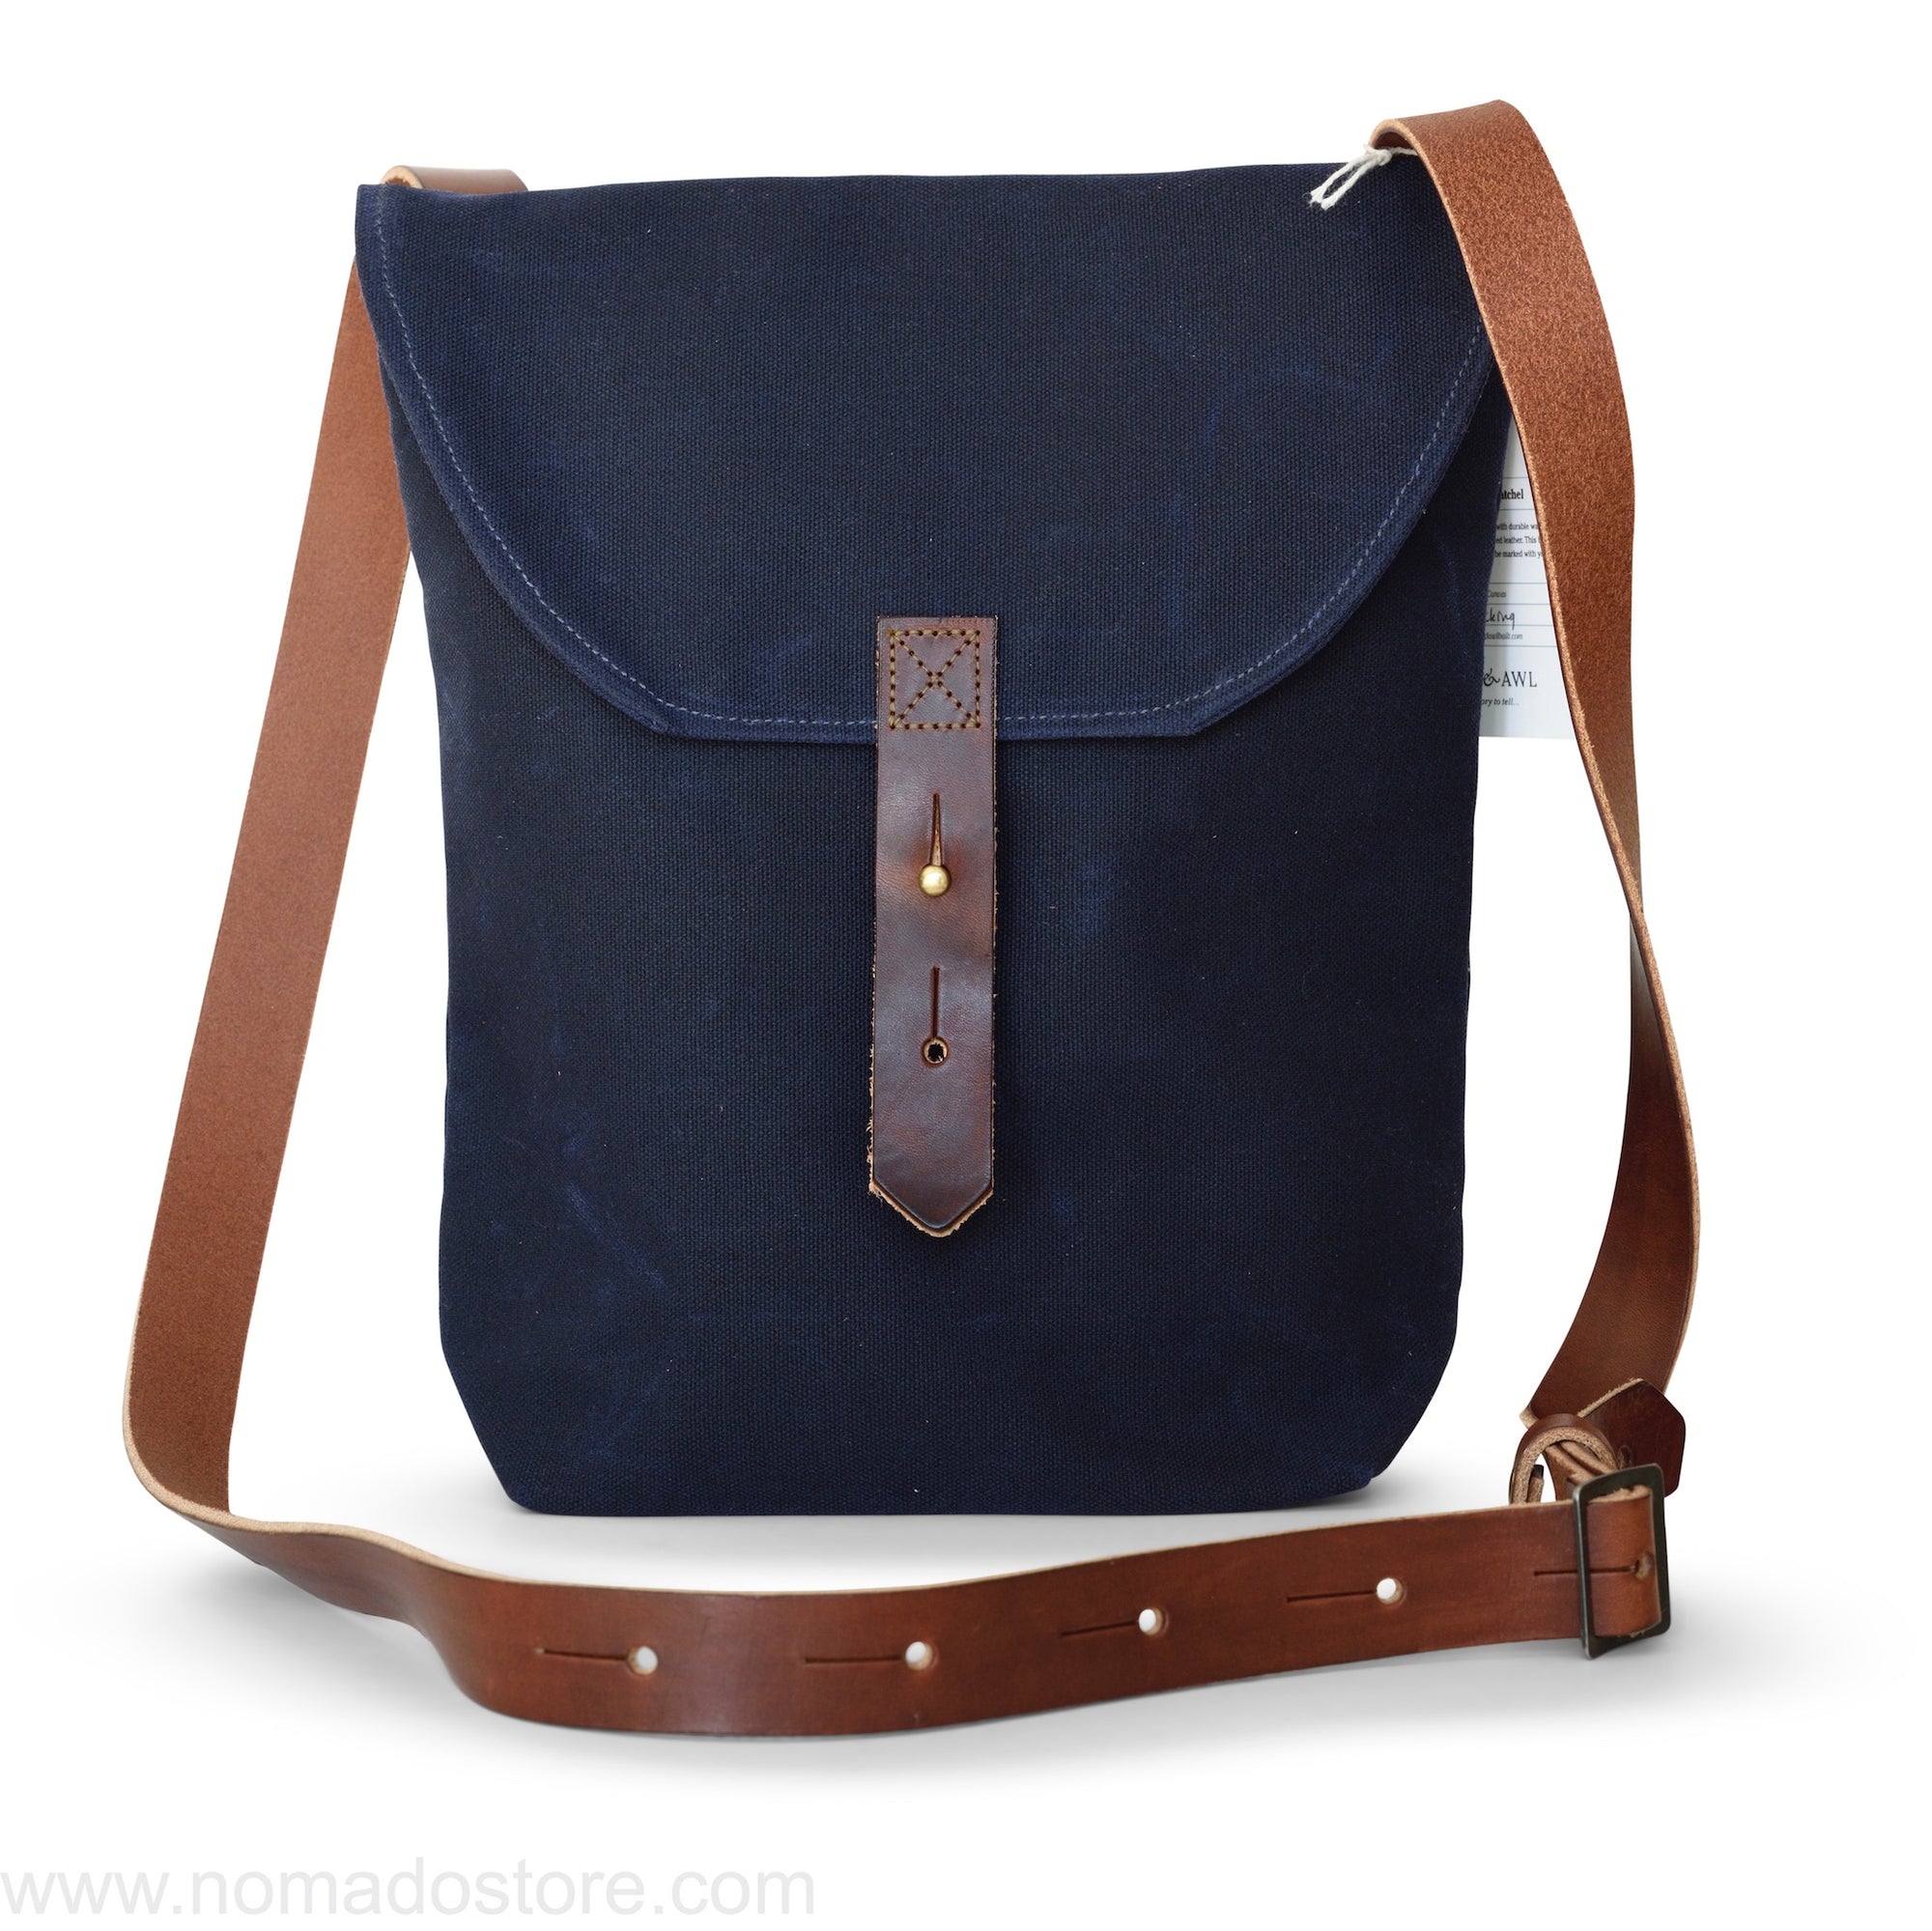 Peg and Awl The Hunter Satchel - Rook - NOMADO Store 